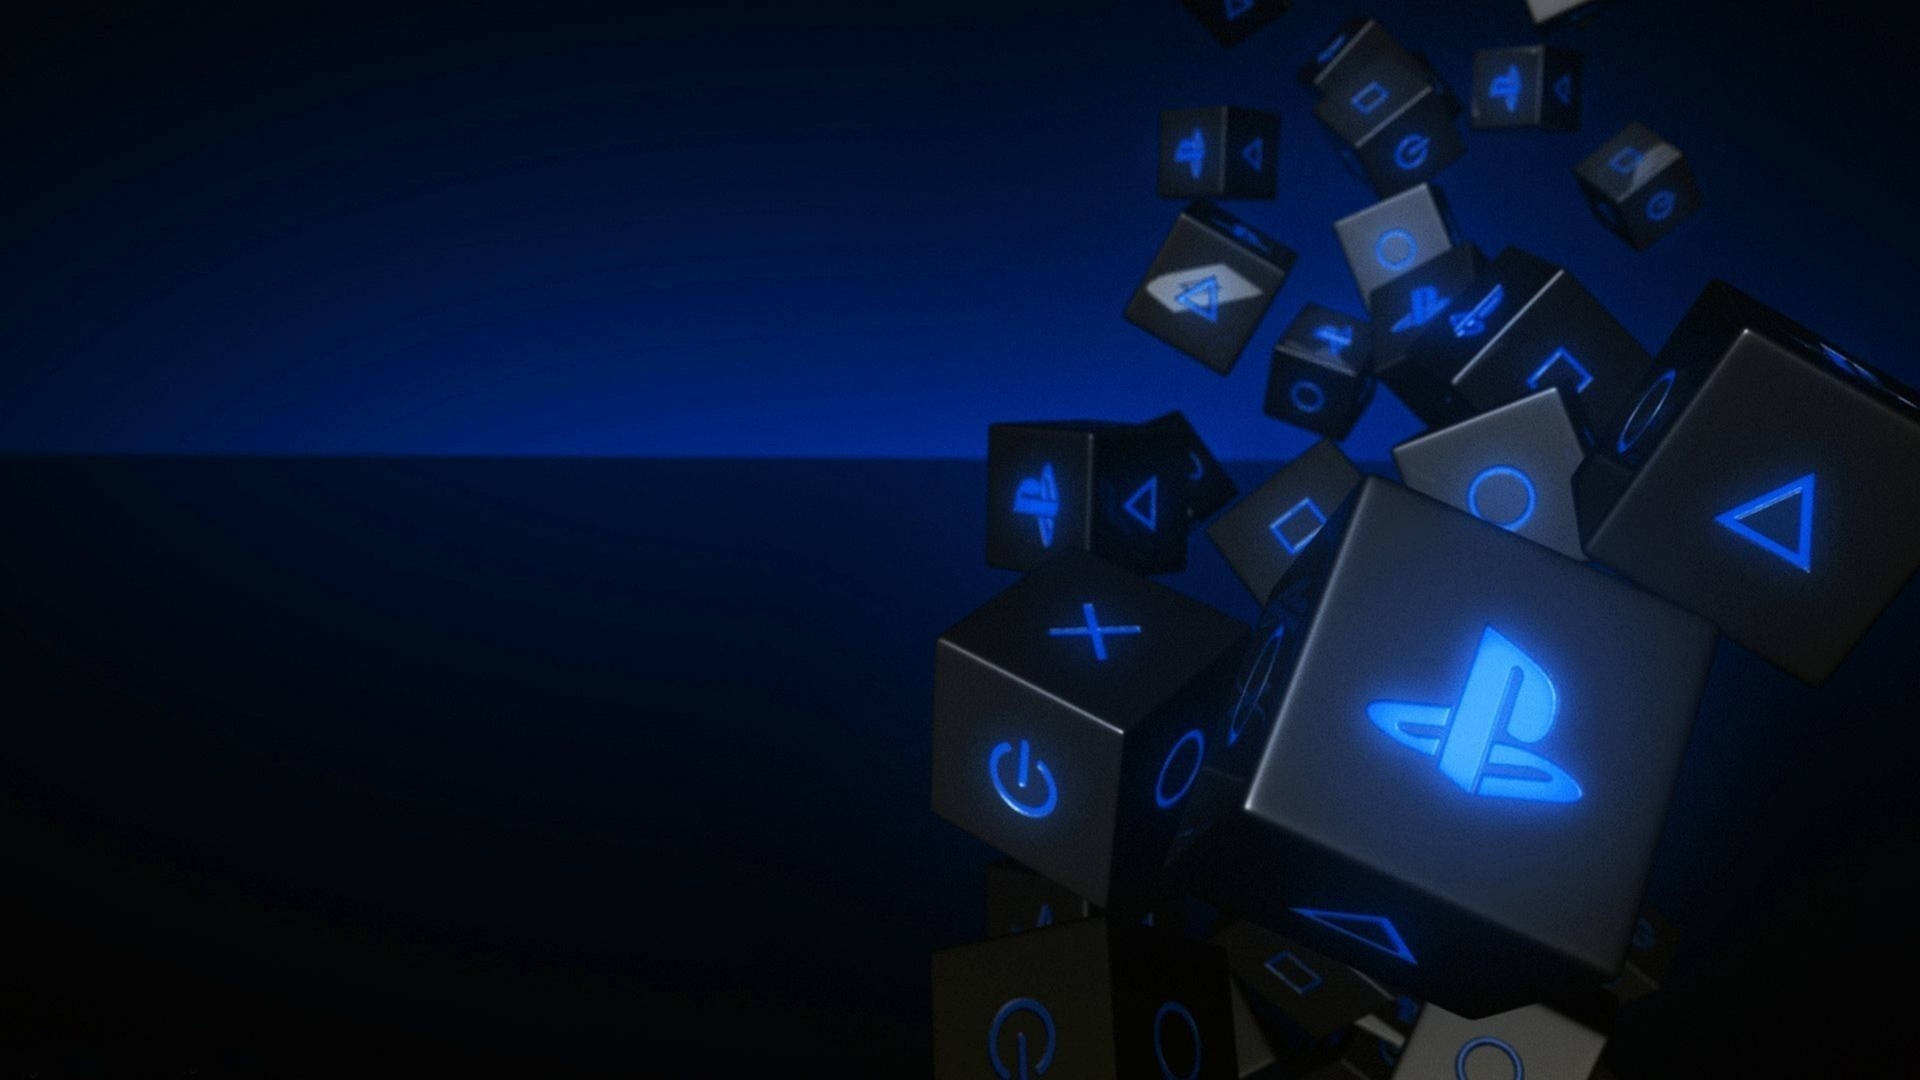 Brand Logos And Icons On Cubes 4k Ps4 Wallpaper